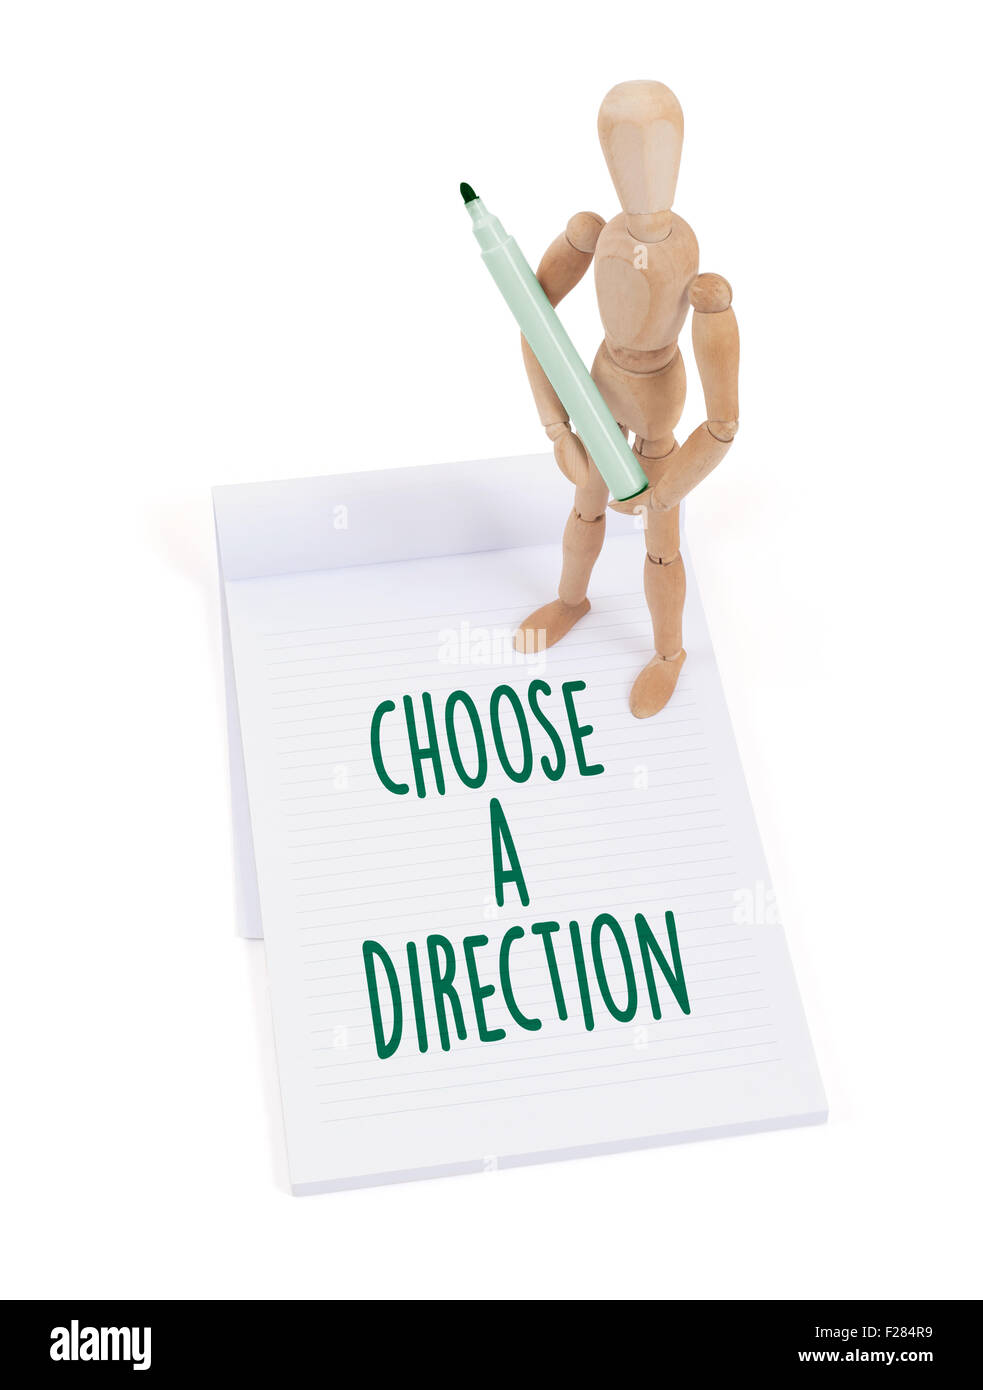 Wooden mannequin writing in a scrapbook - Choose a direction Stock Photo